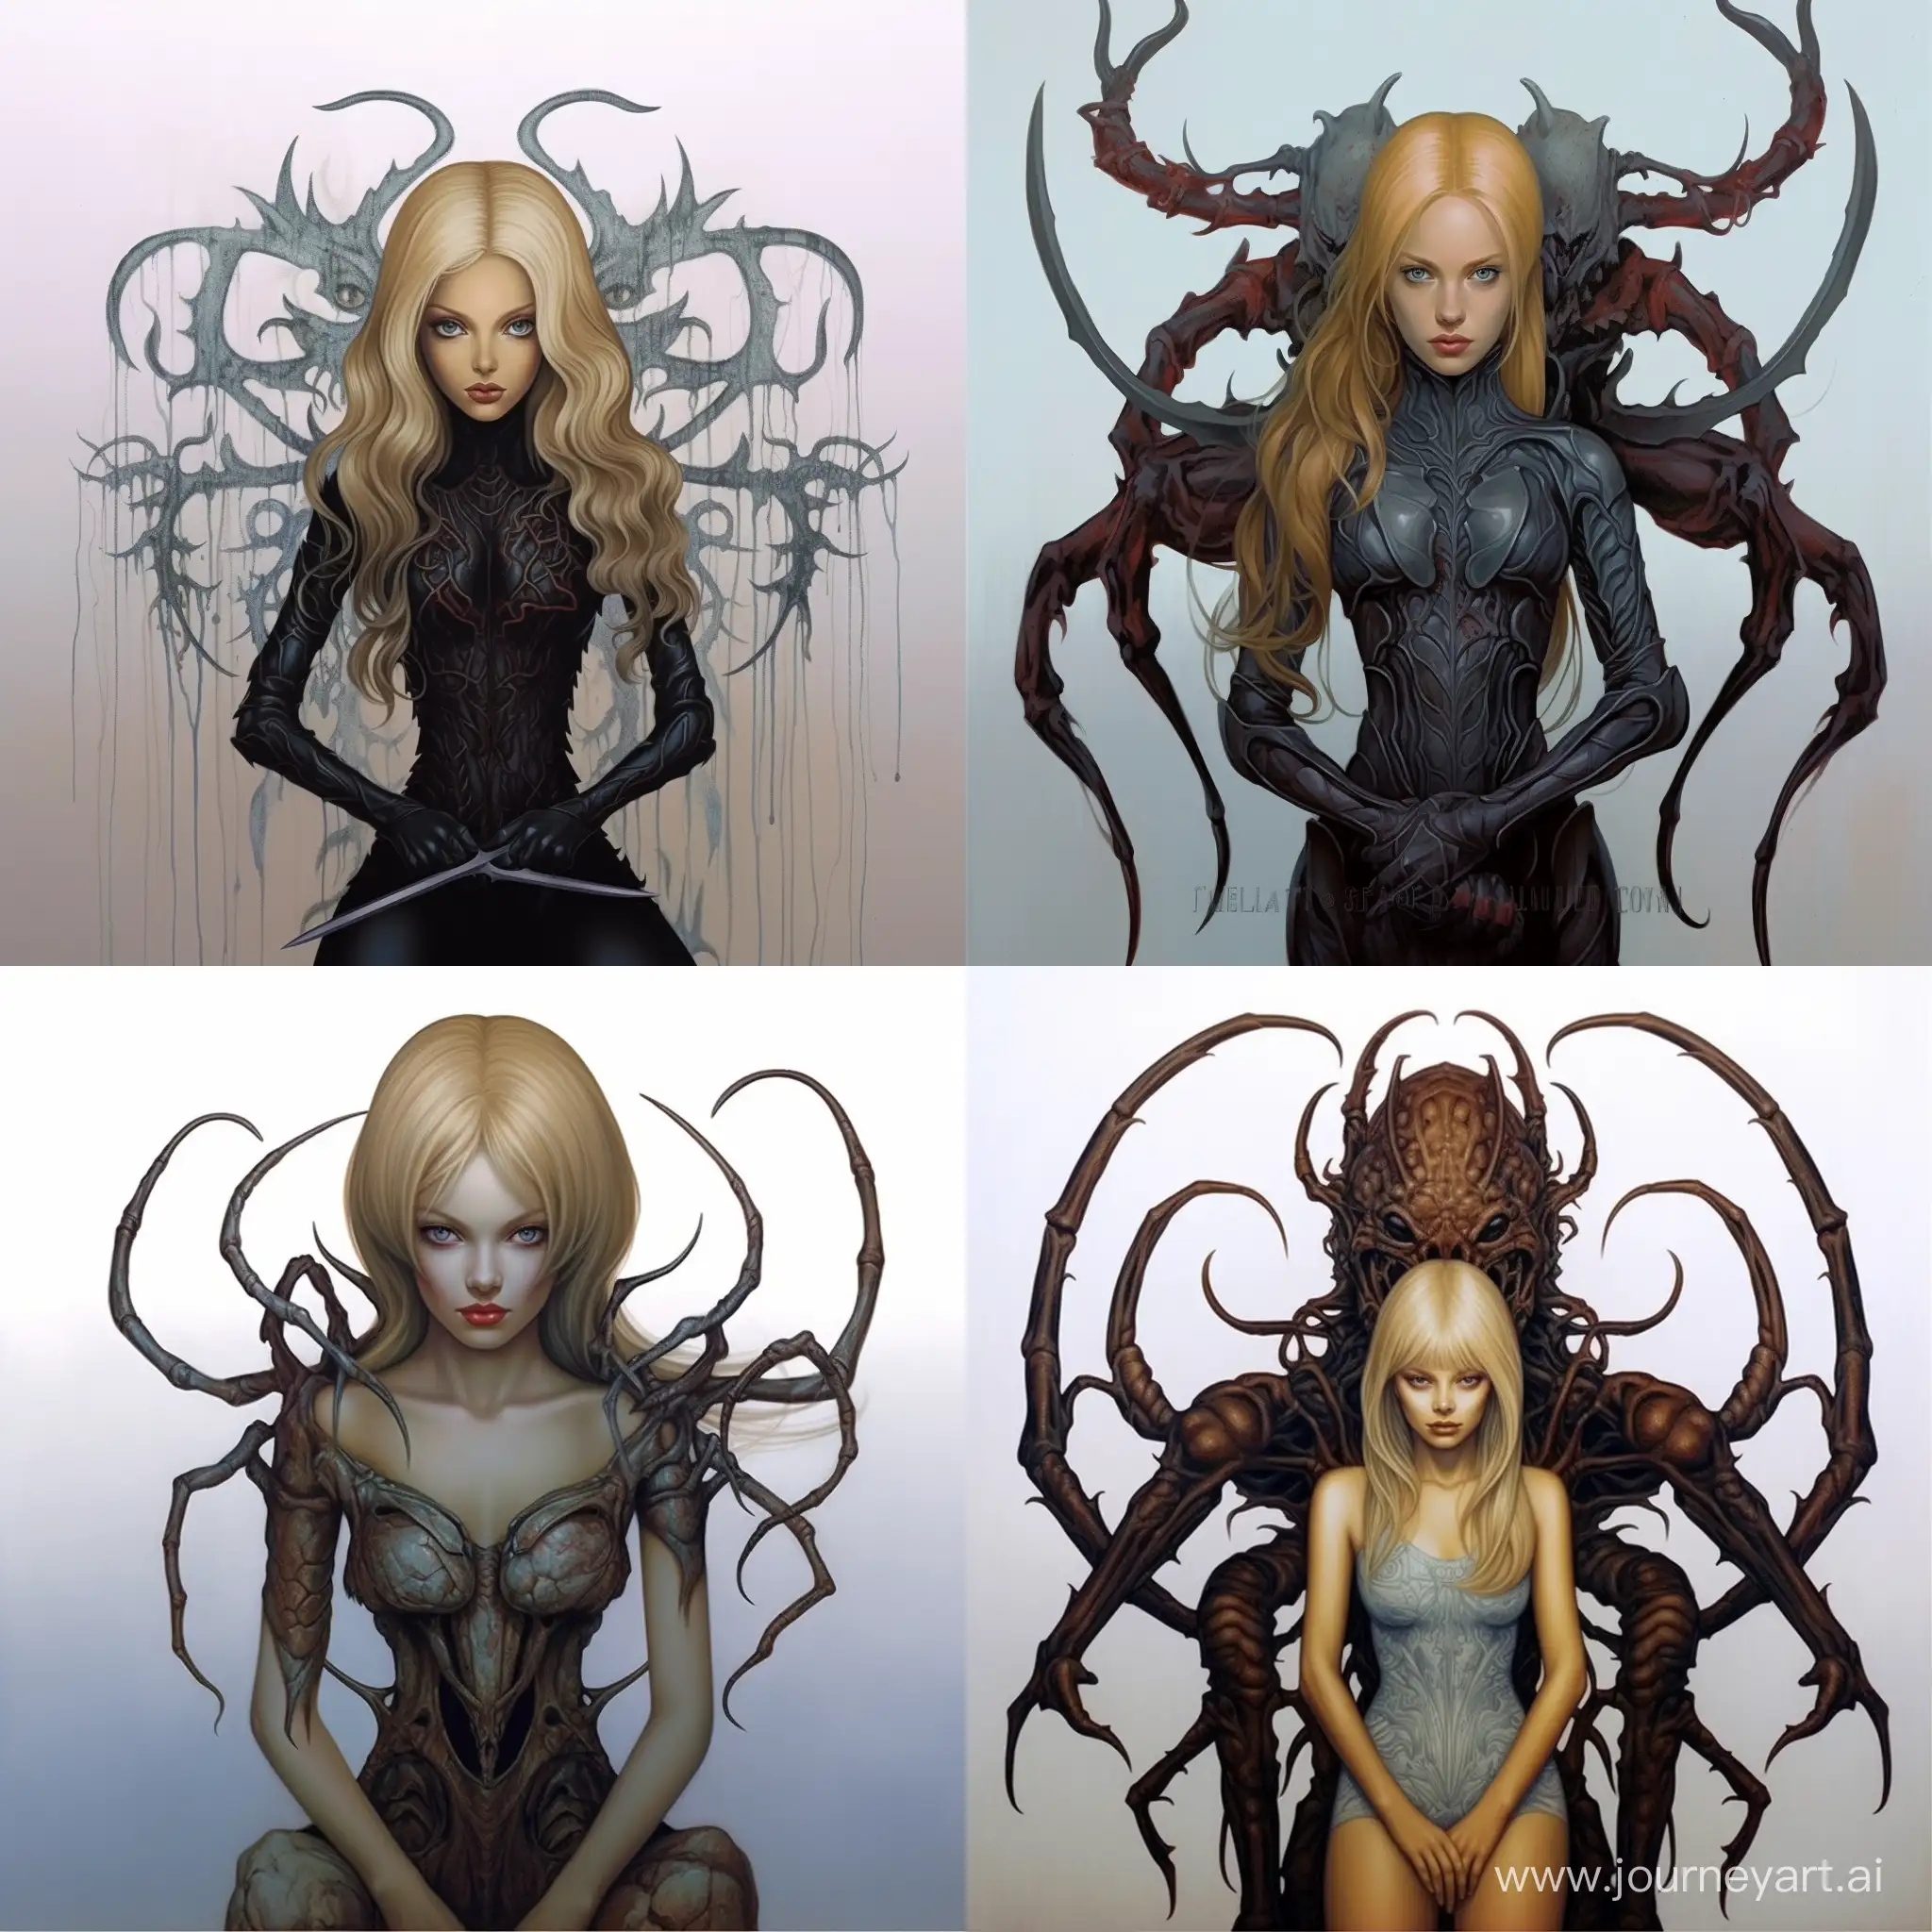 Blonde-Woman-Facing-a-Scorpion-in-a-11-Art-Ratio